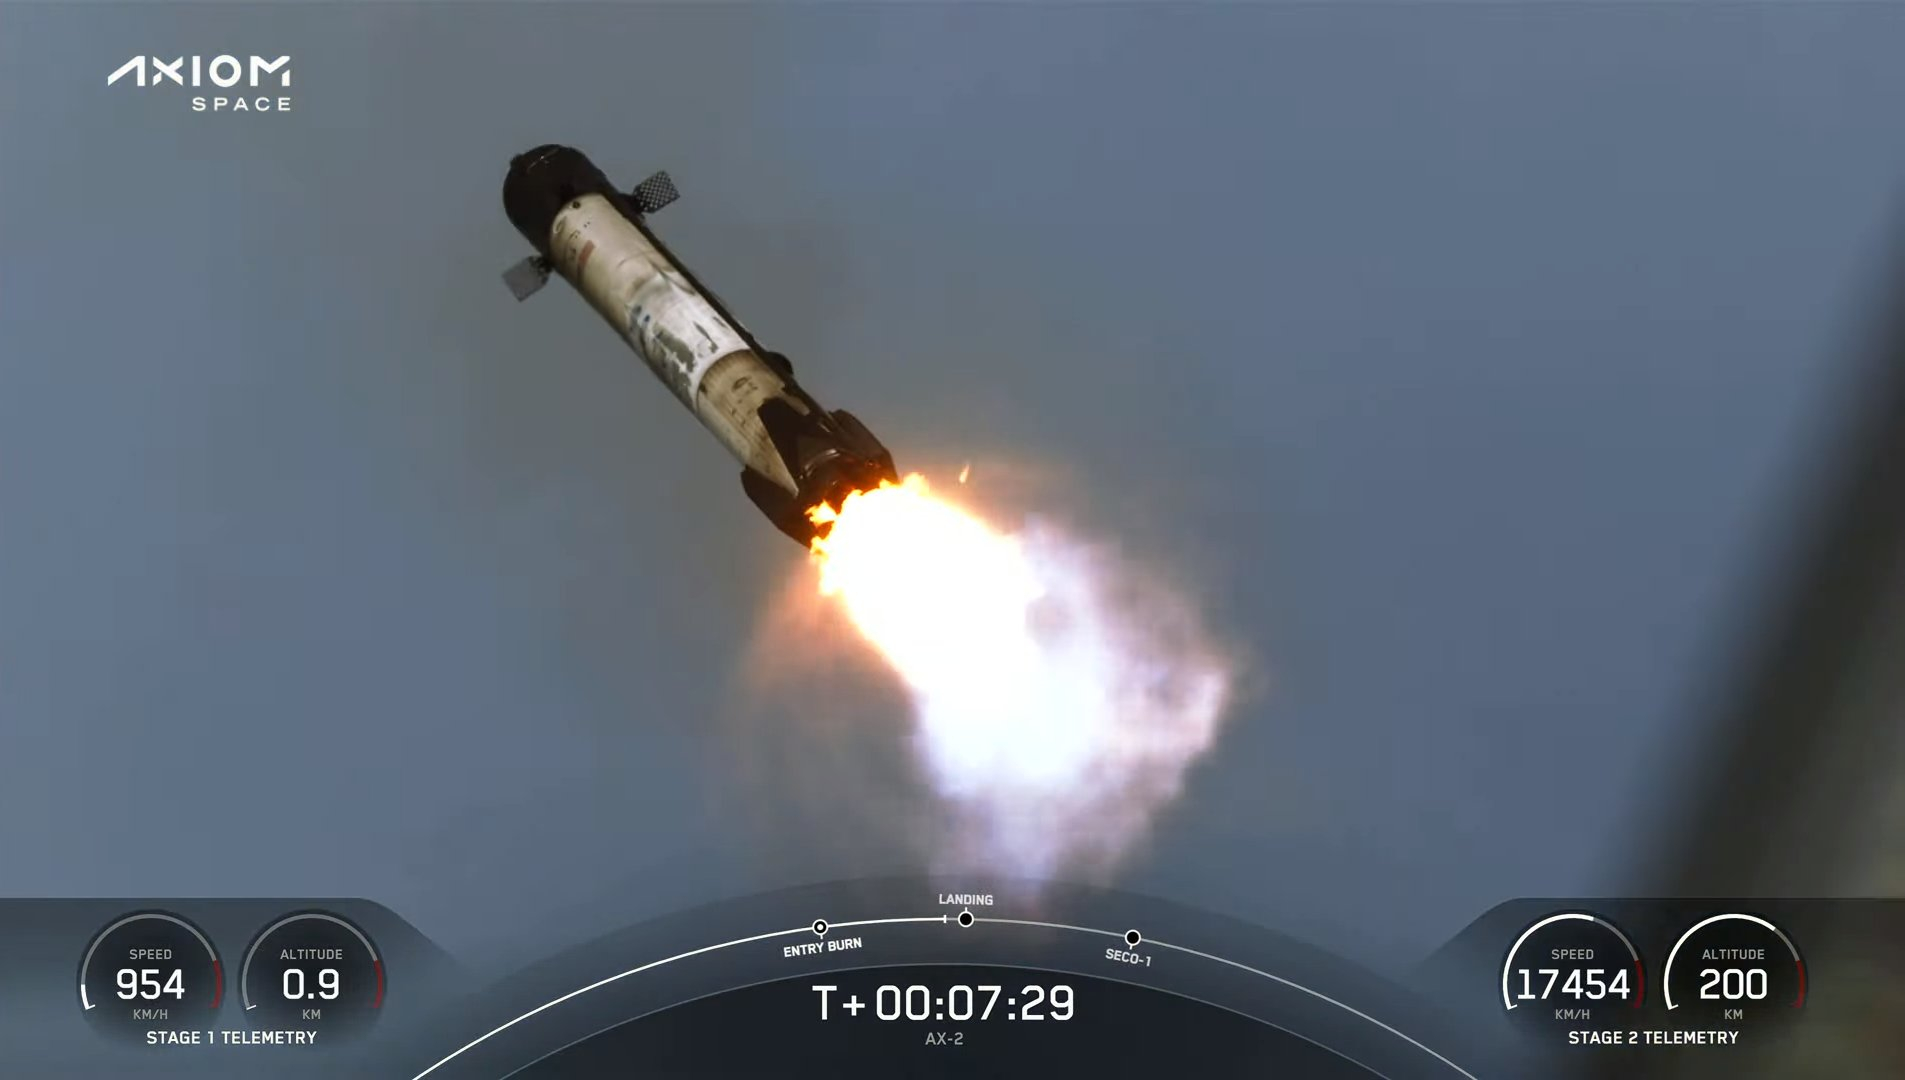 SpaceX Falcon 9 rocket firing its engines for landing after launching into space.